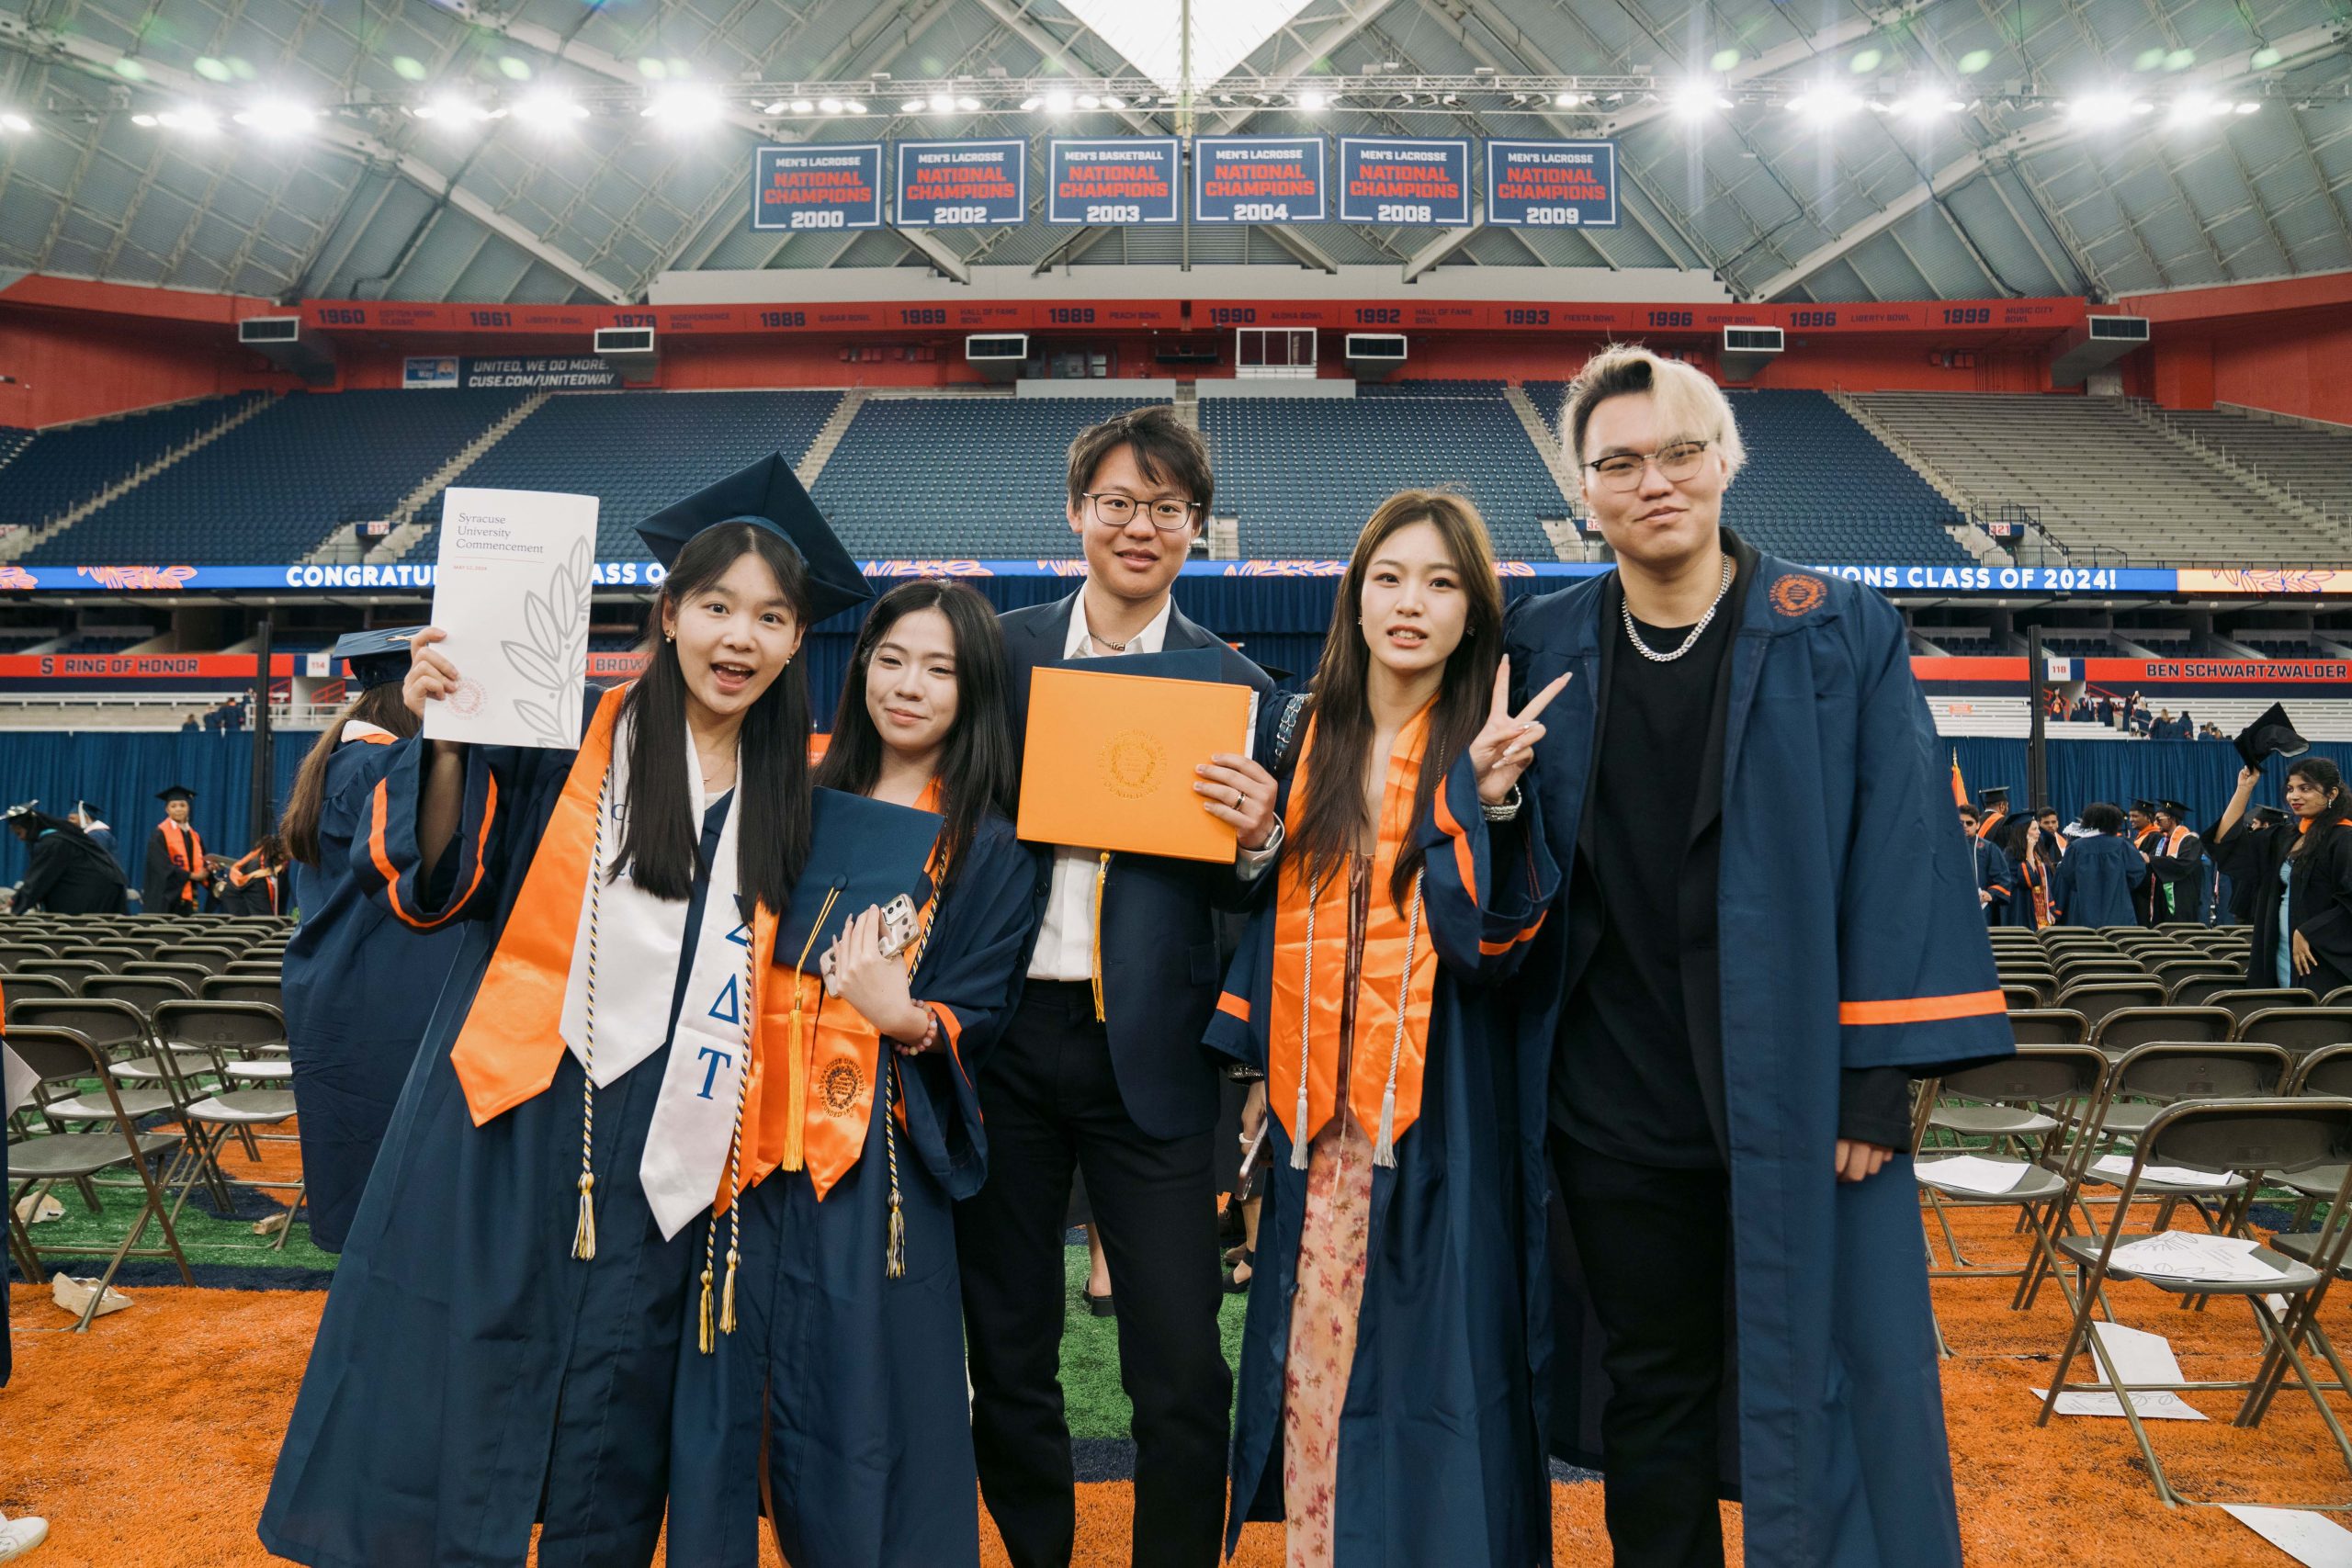 Five students standing together after Commencement 